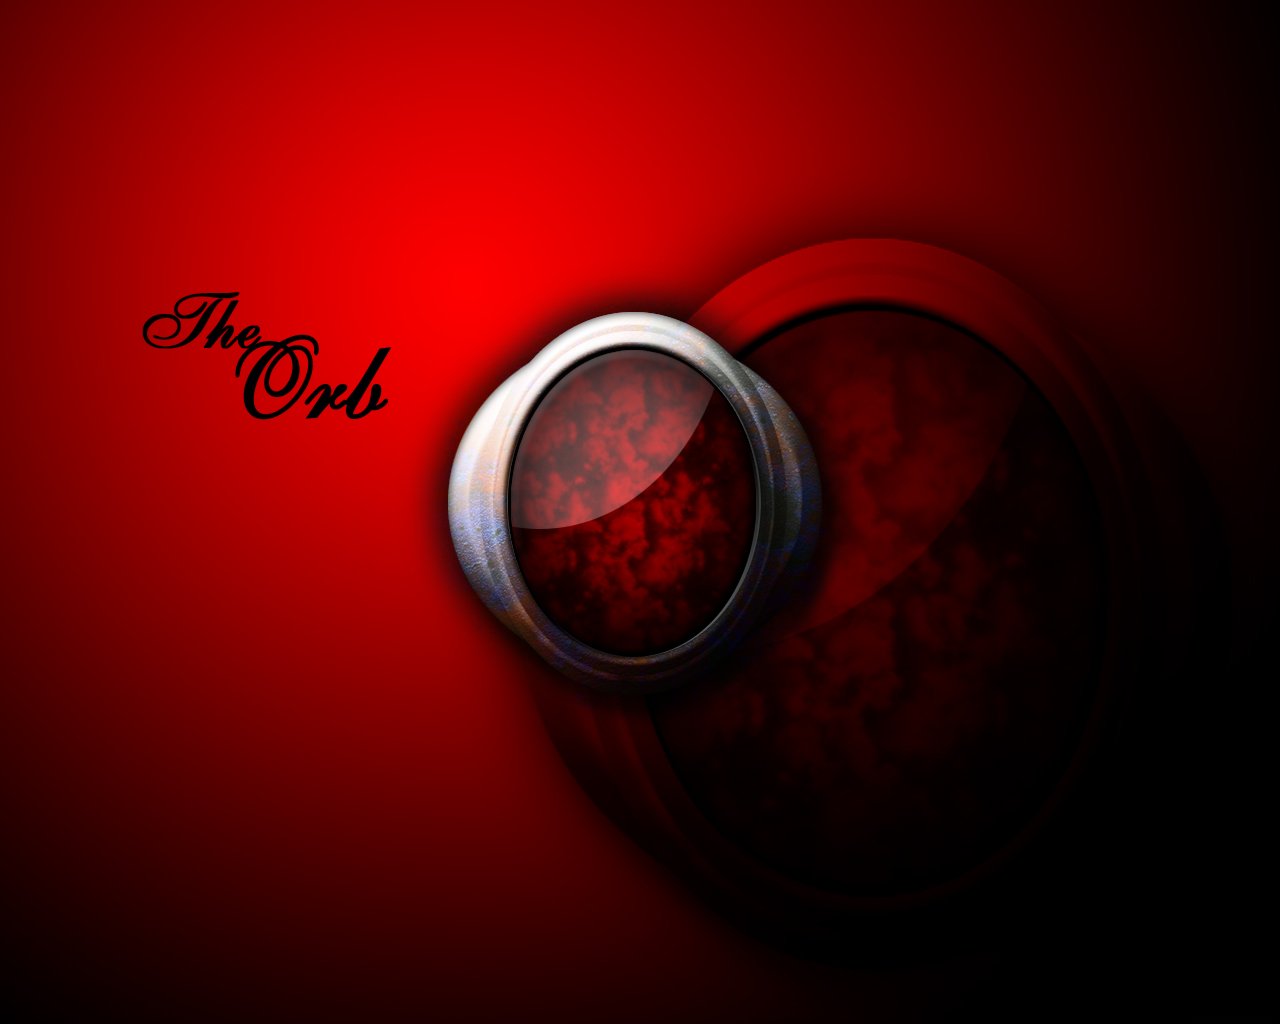 The Red Orb6731913064 - The Red Orb - Smoke